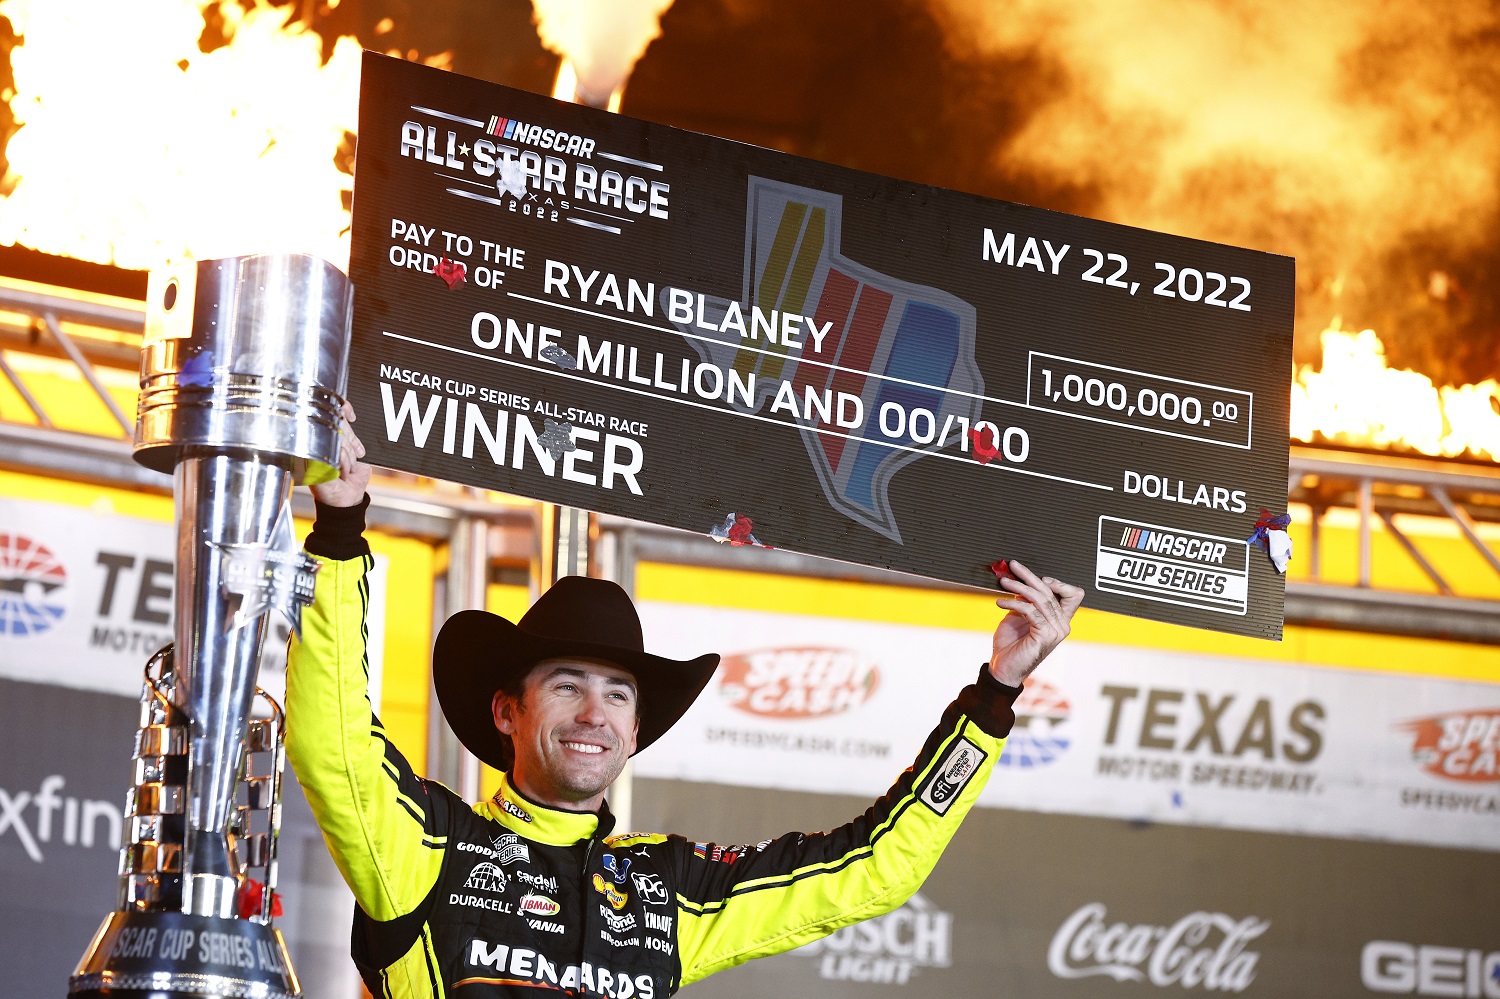 Ryan Blaney in Victory lLne after winning the NASCAR Cup Series All-Star Race at Texas Motor Speedway on May 22, 2022.